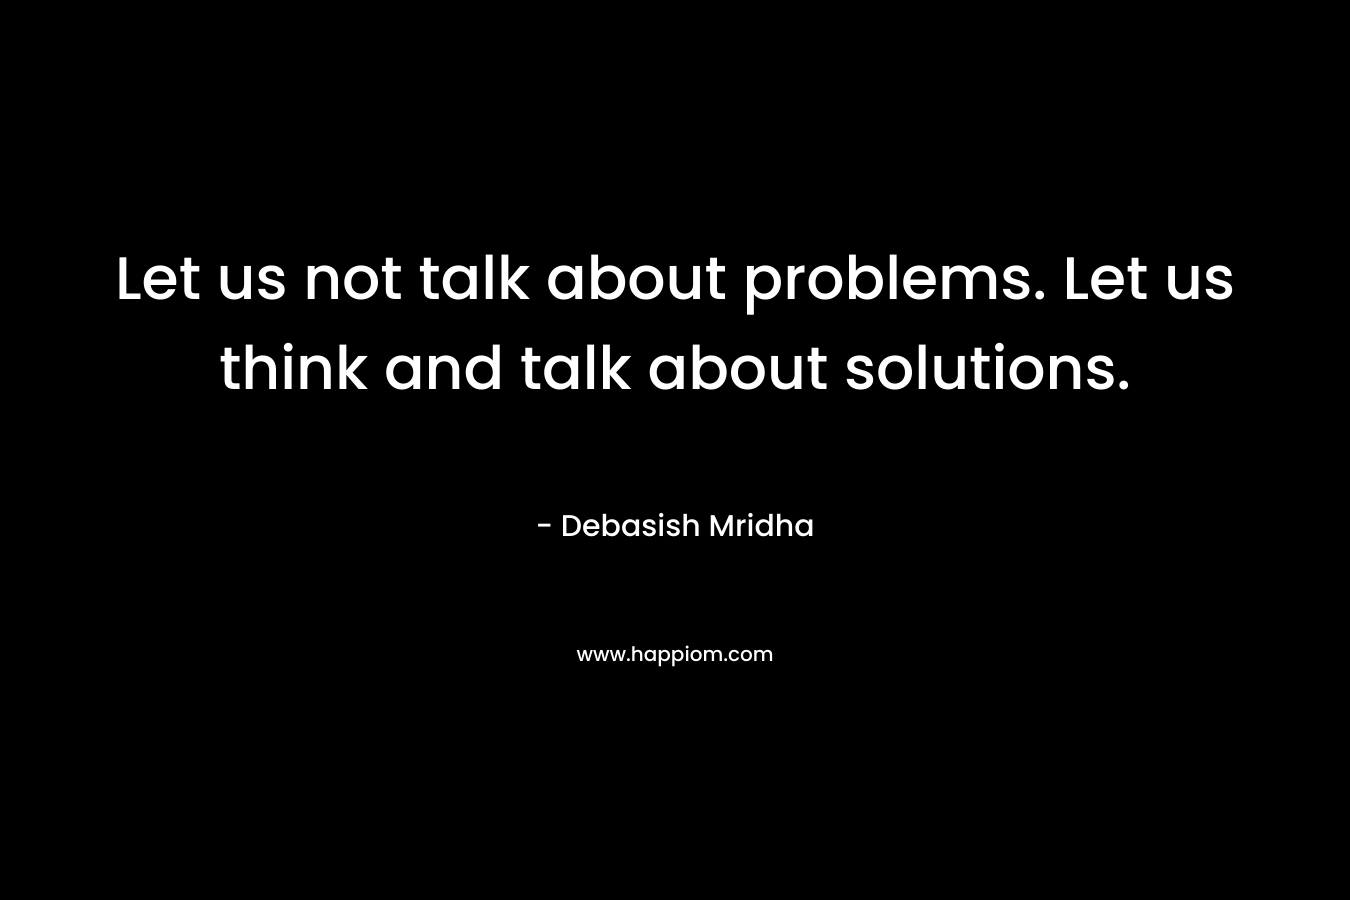 Let us not talk about problems. Let us think and talk about solutions.